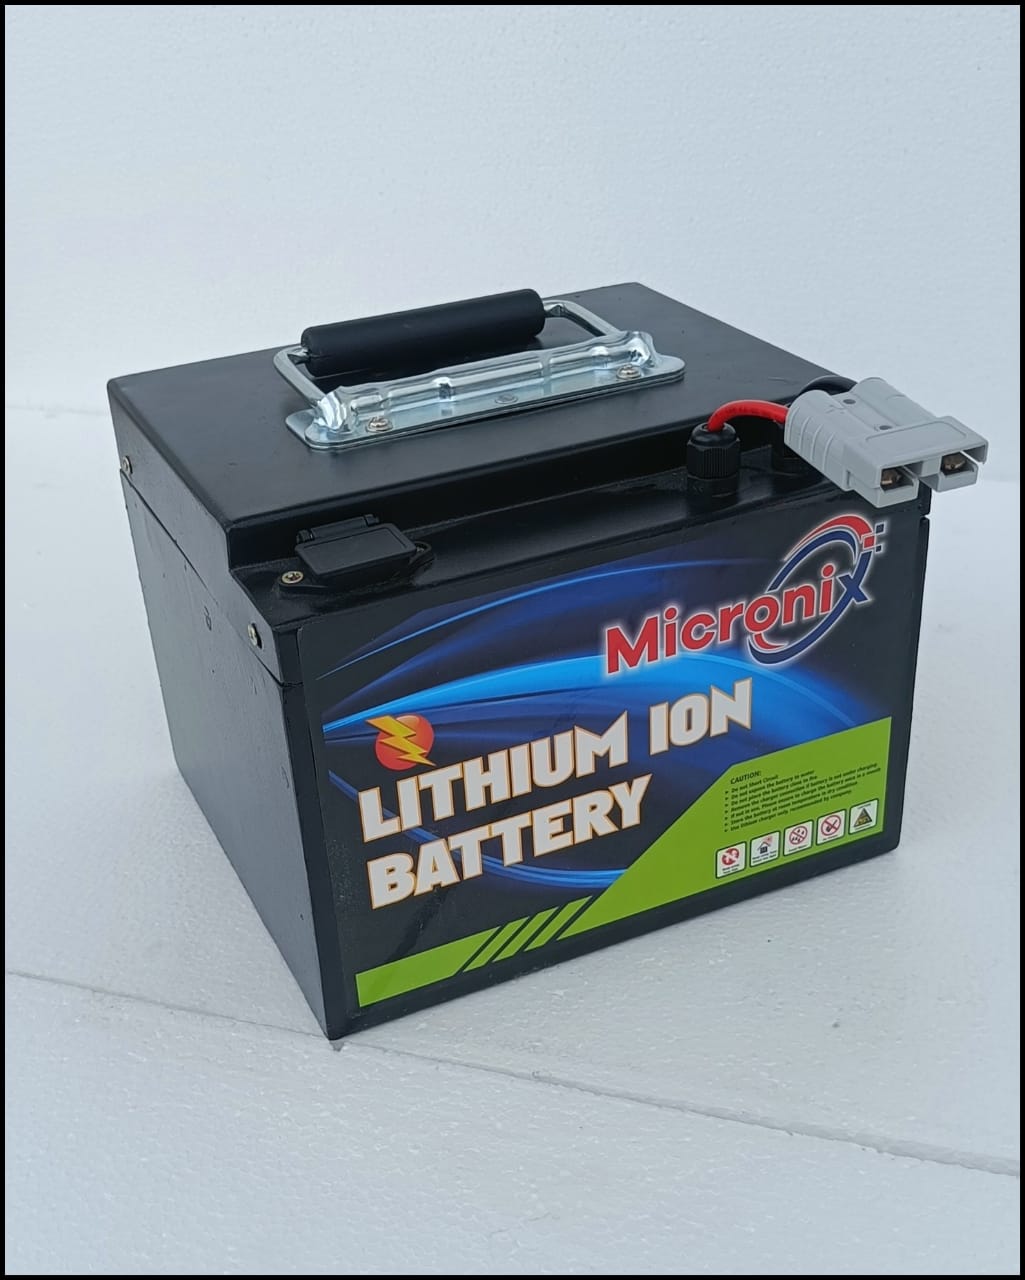 48V LITHIUM ION BATTERY-MICRONIX